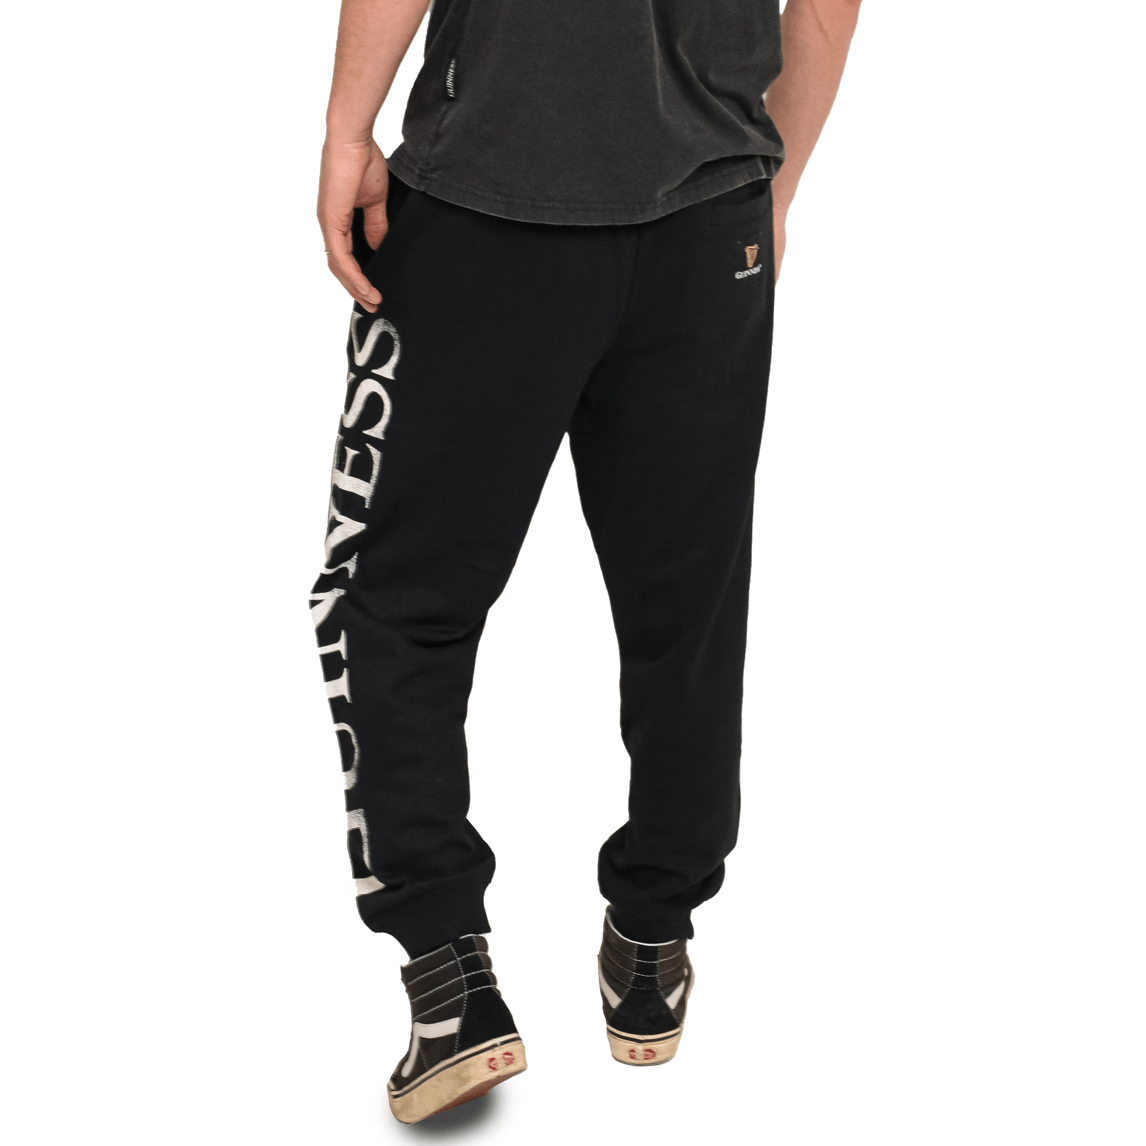 The comfortable back of a man wearing organic cotton Guinness Joggers by Guinness.